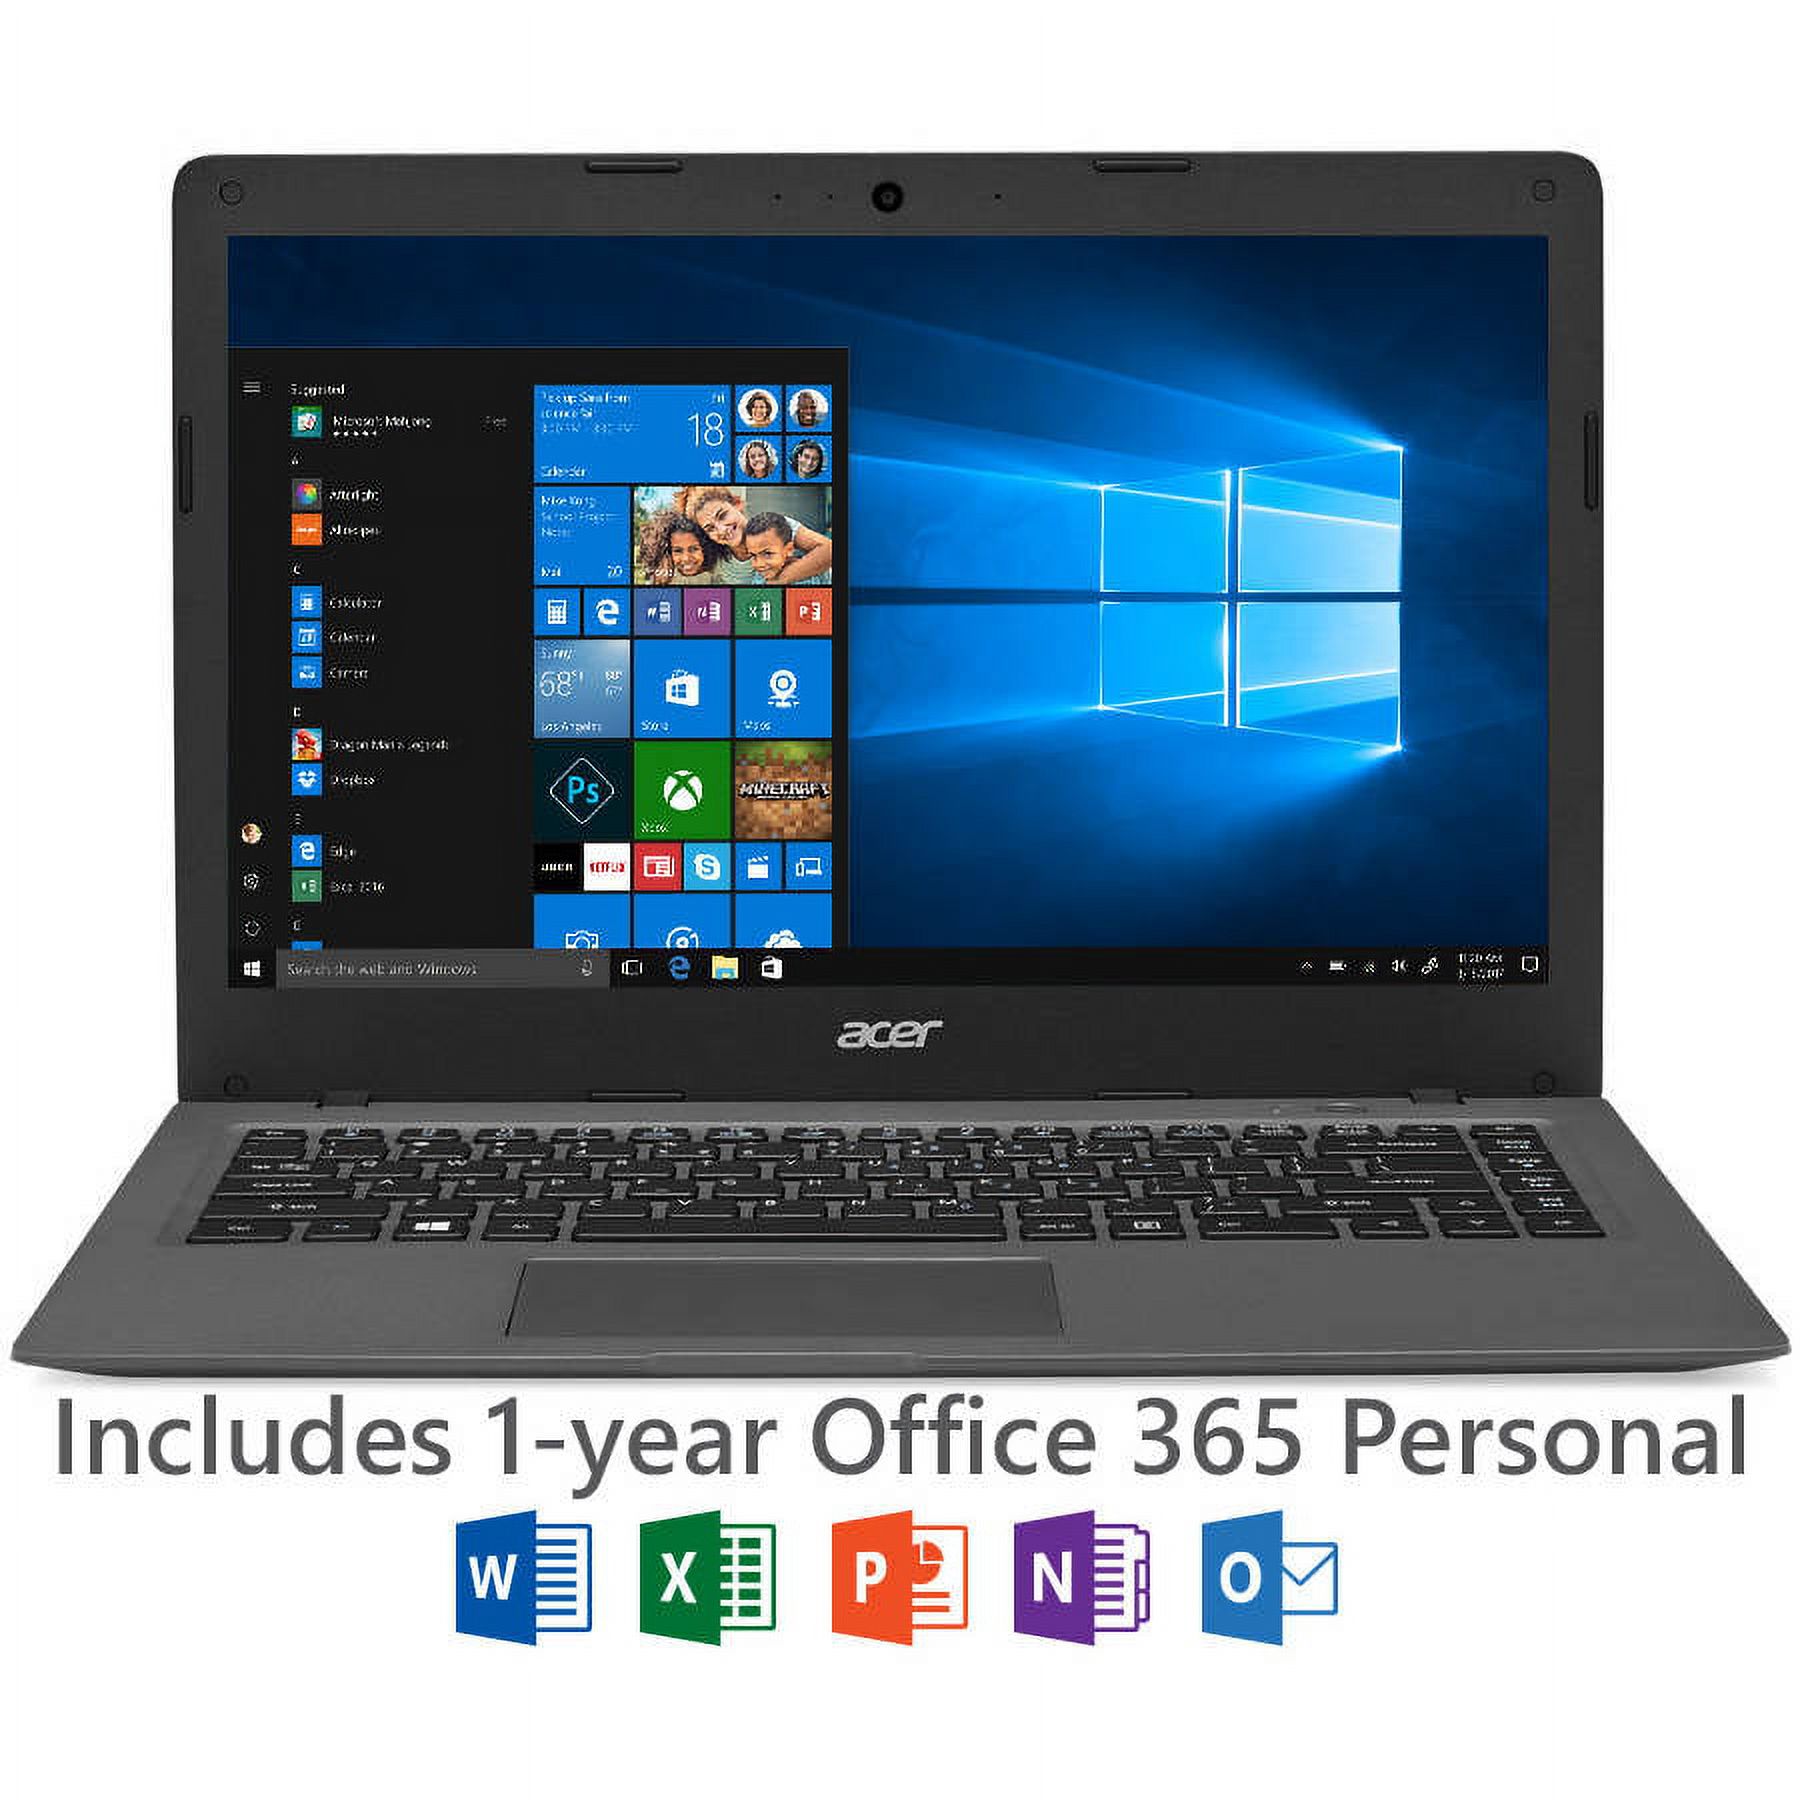 Acer Mineral Gray 14" Aspire One Cloudbook AO1-431-C8G8 Laptop PC, Windows 10, Office 365 Personal 1-year subscription included with Intel Celeron N3050 Processor, 2GB Memory, 32GB eMMC - image 3 of 9